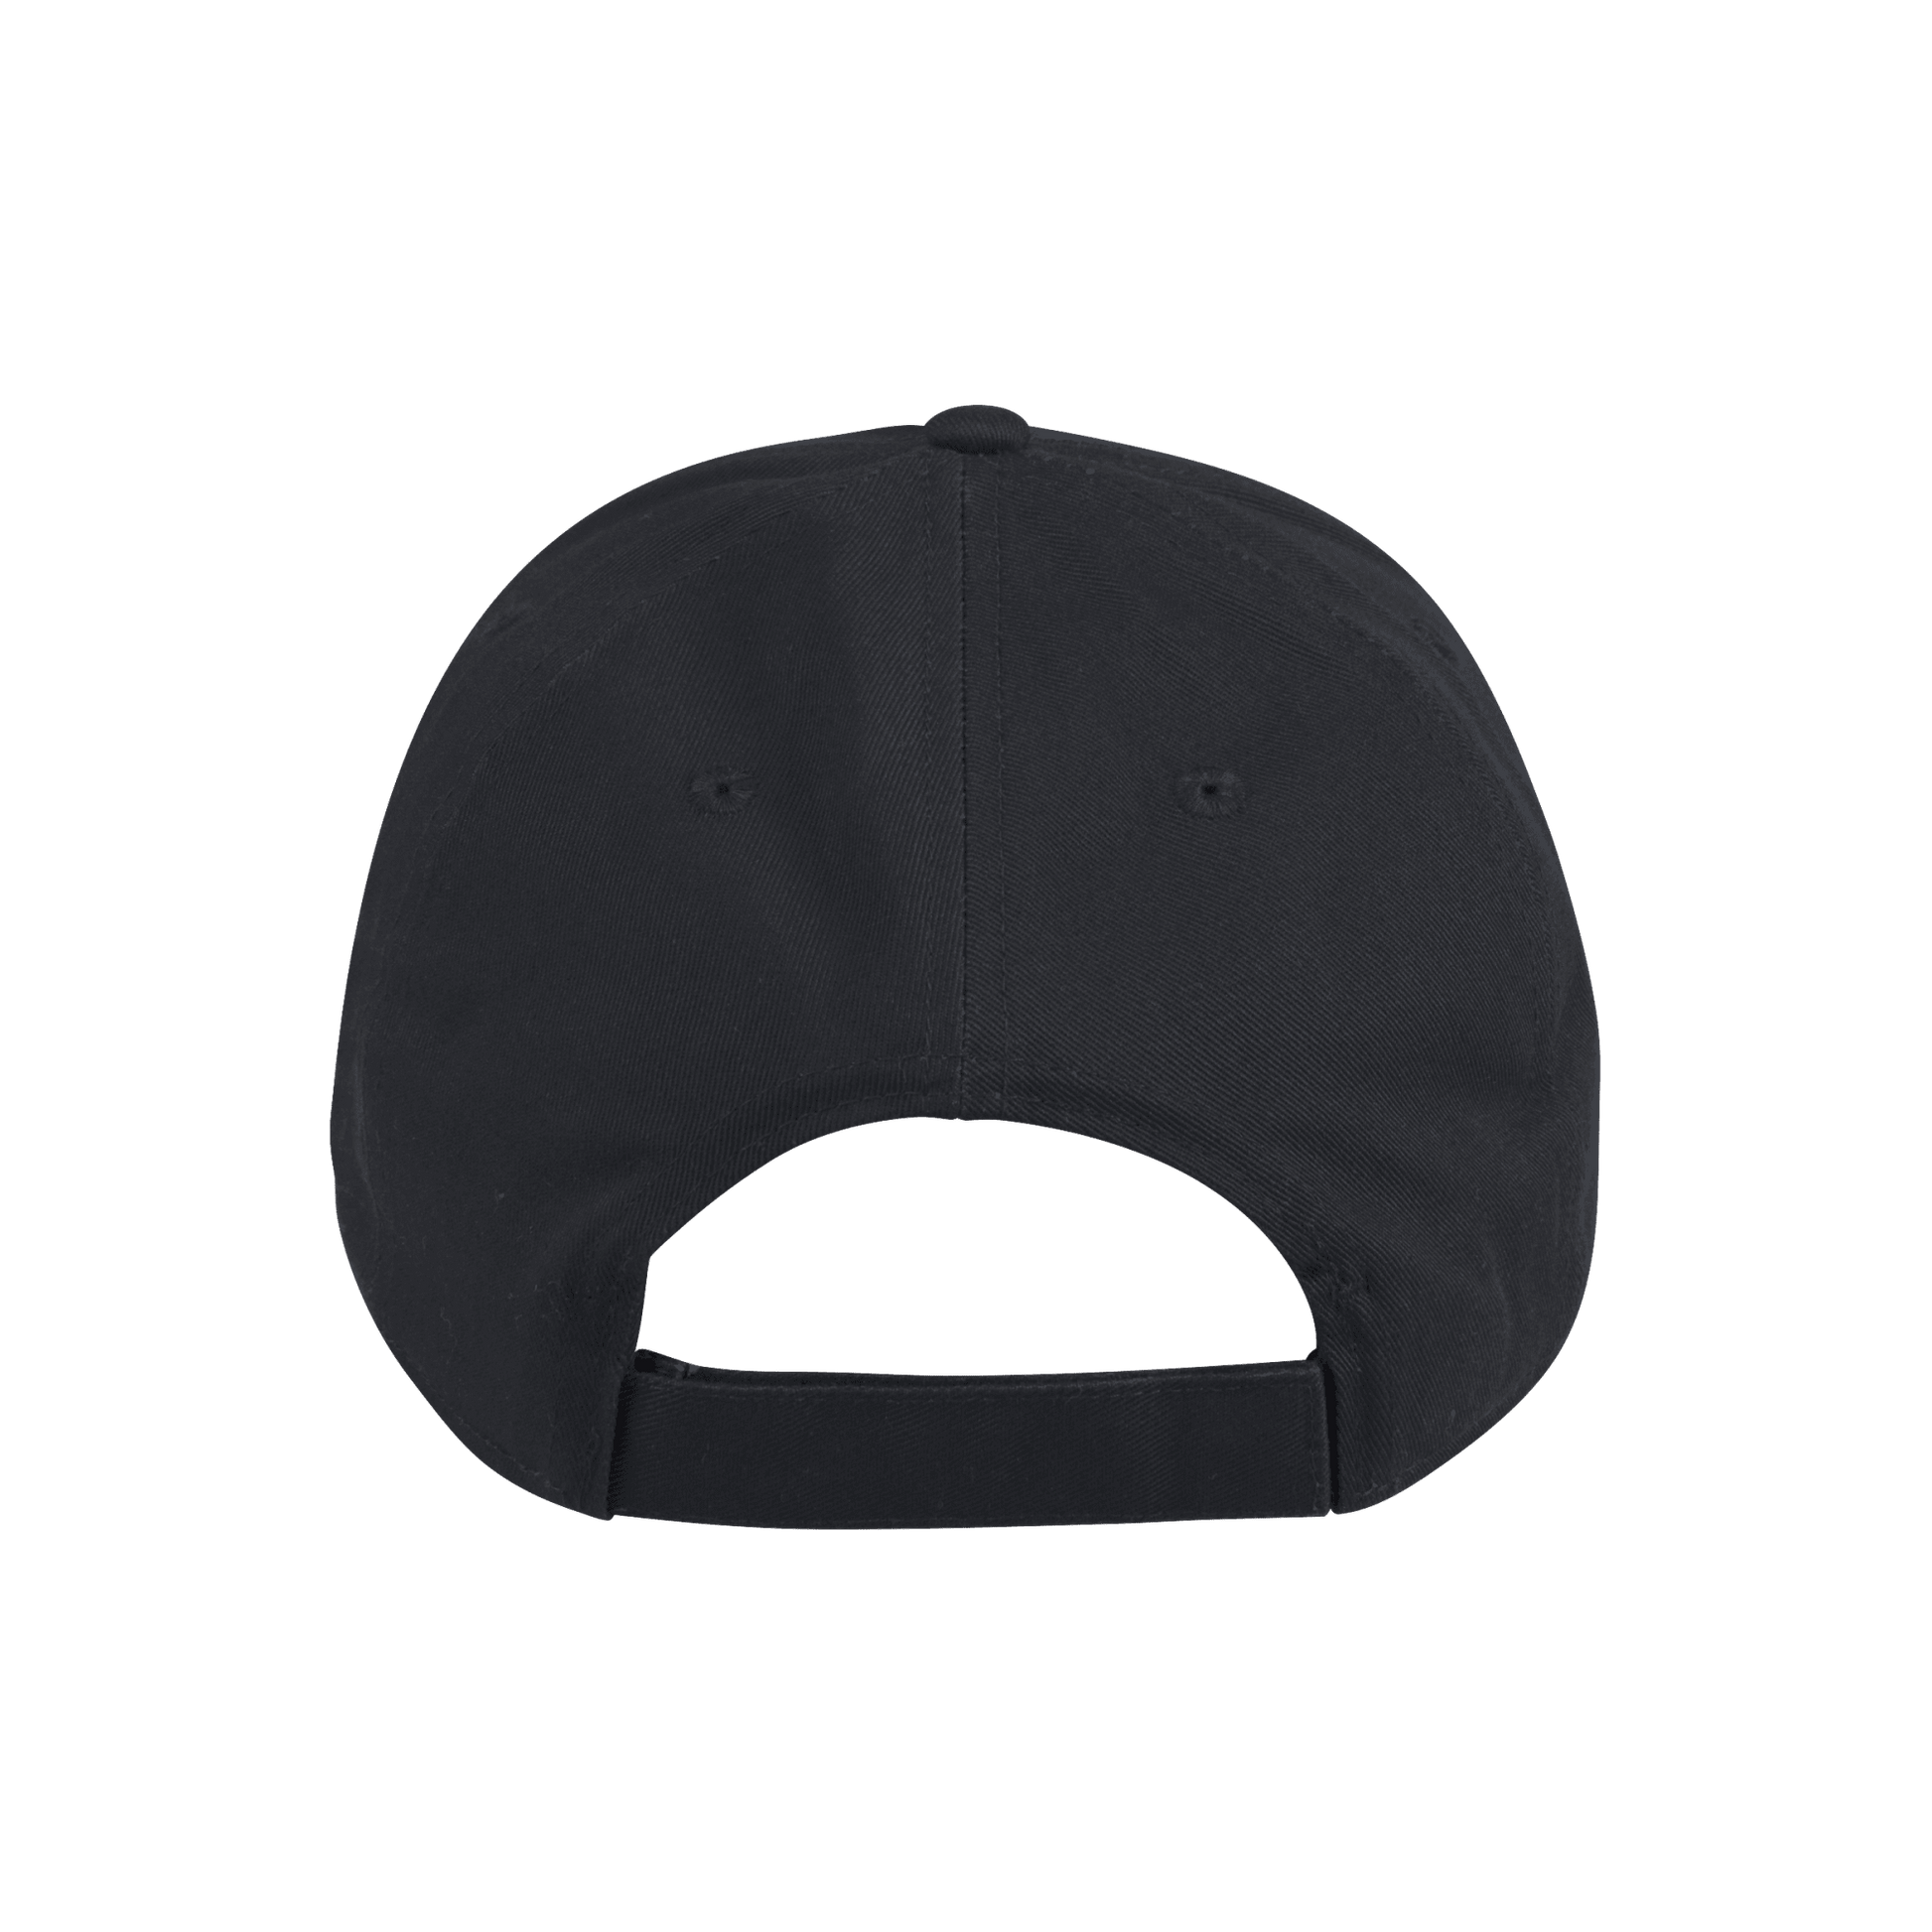 Adjustable Structured Team – Golf Products Cap adidas